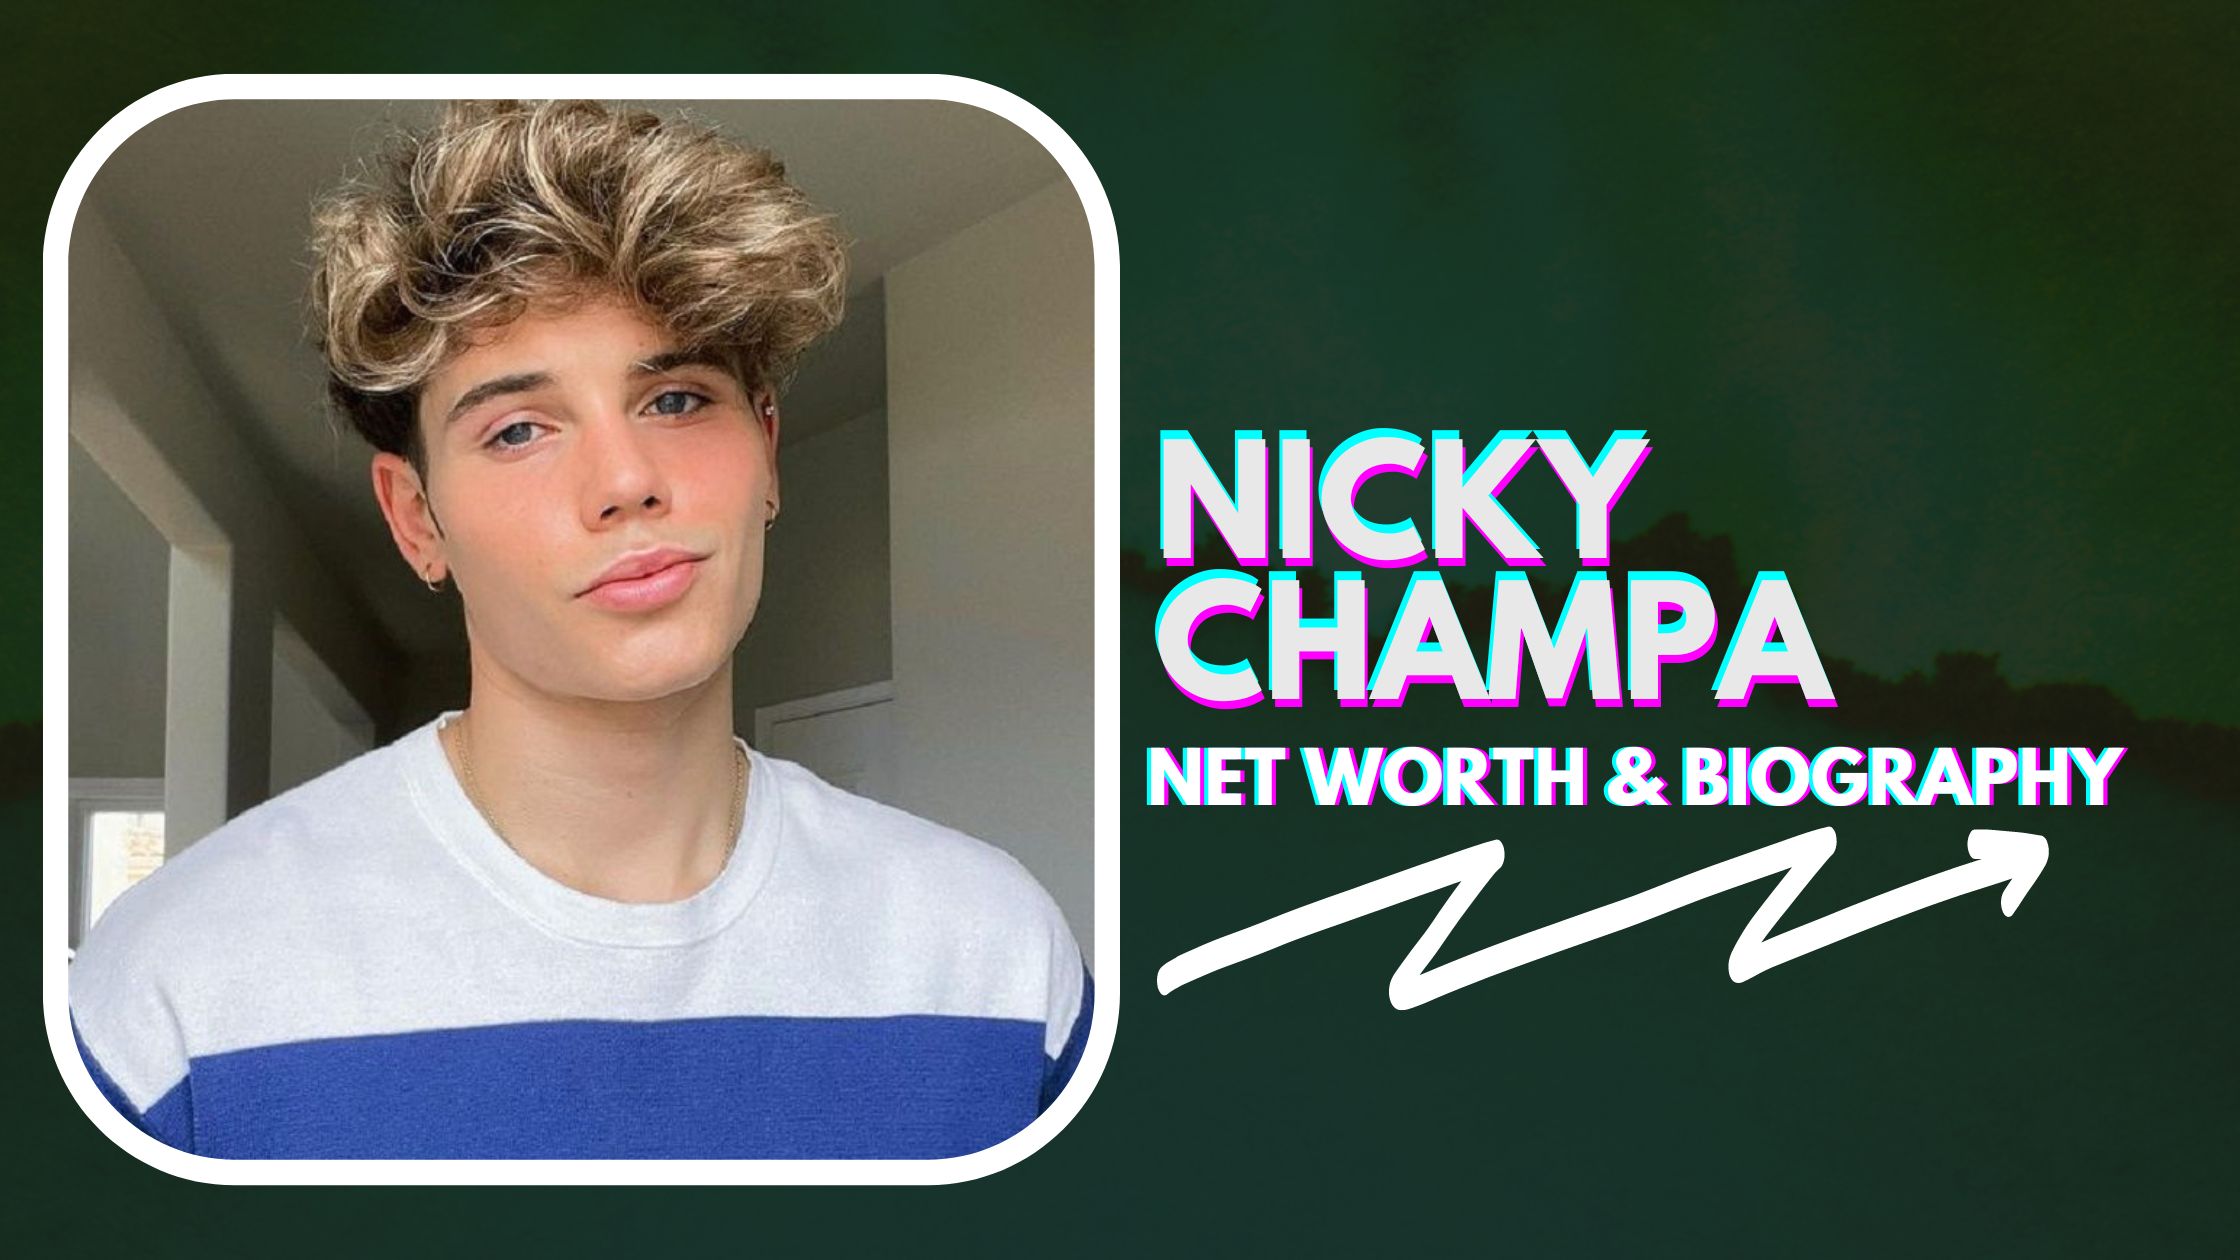 Nicky Champa Net worth and biography